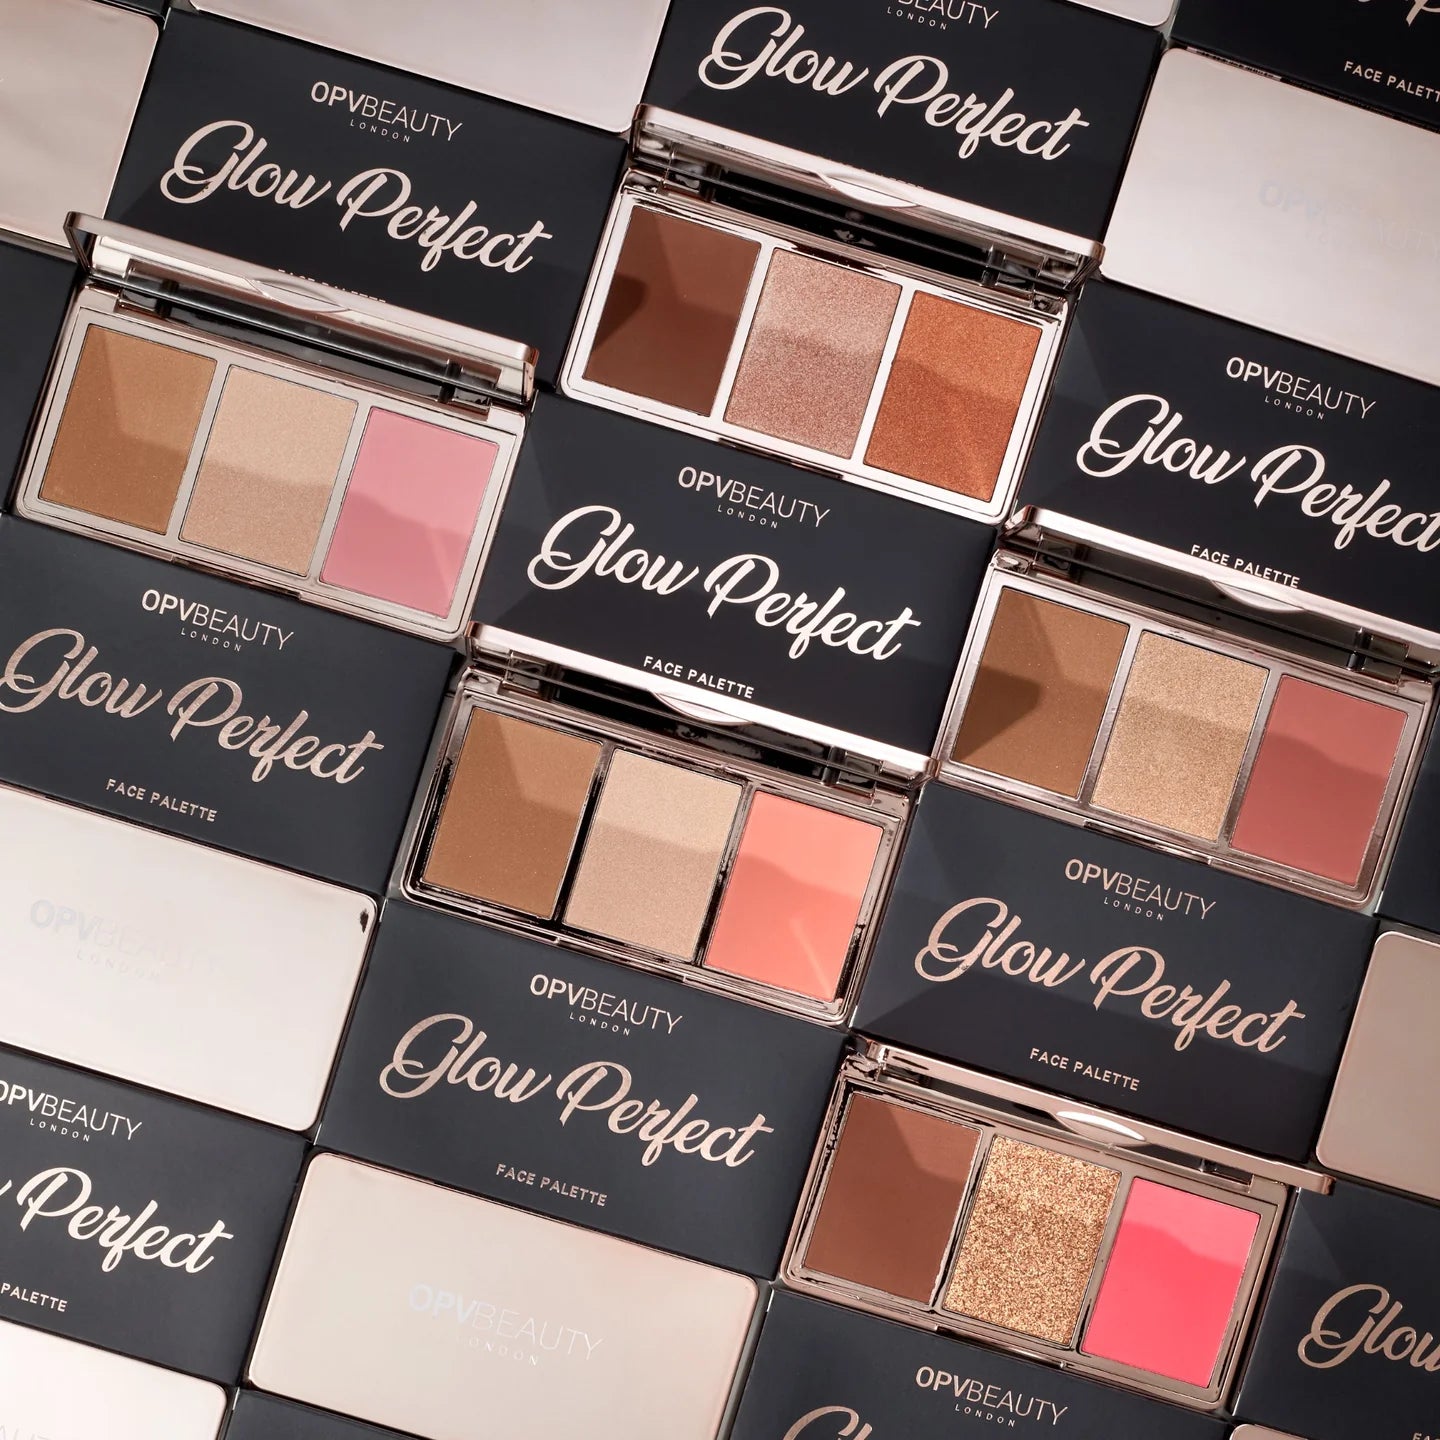 Glow Perfect Face Palette